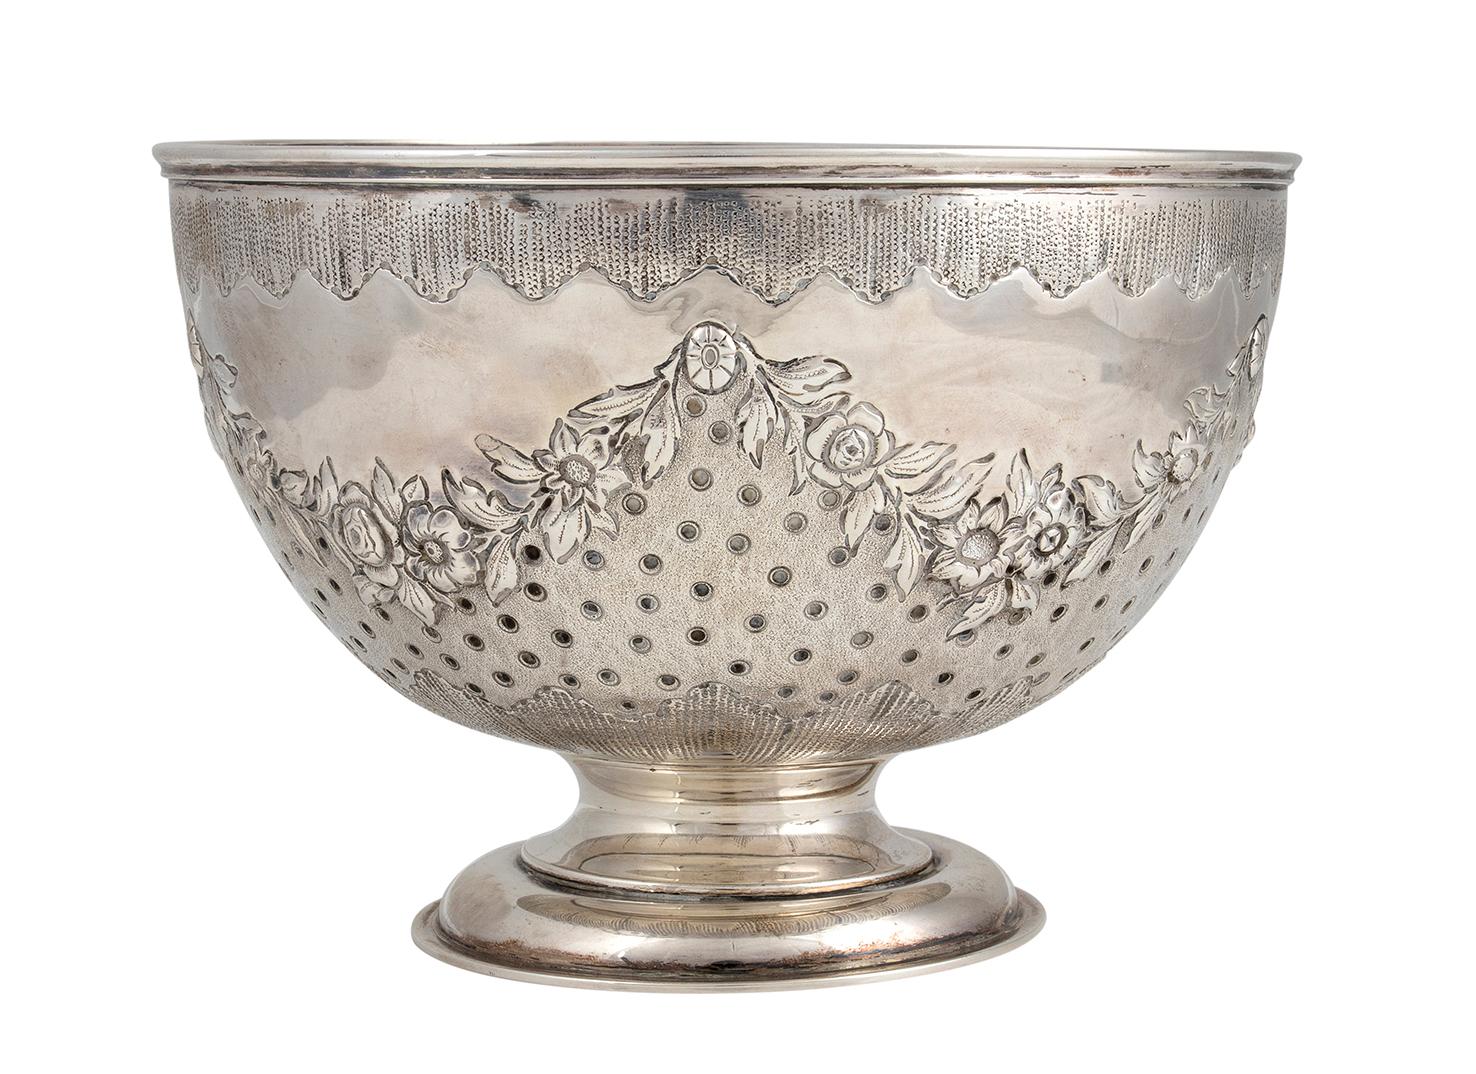 Late Victorian Silver Bowl by J. Hunt and R. Roskell, England, 1905